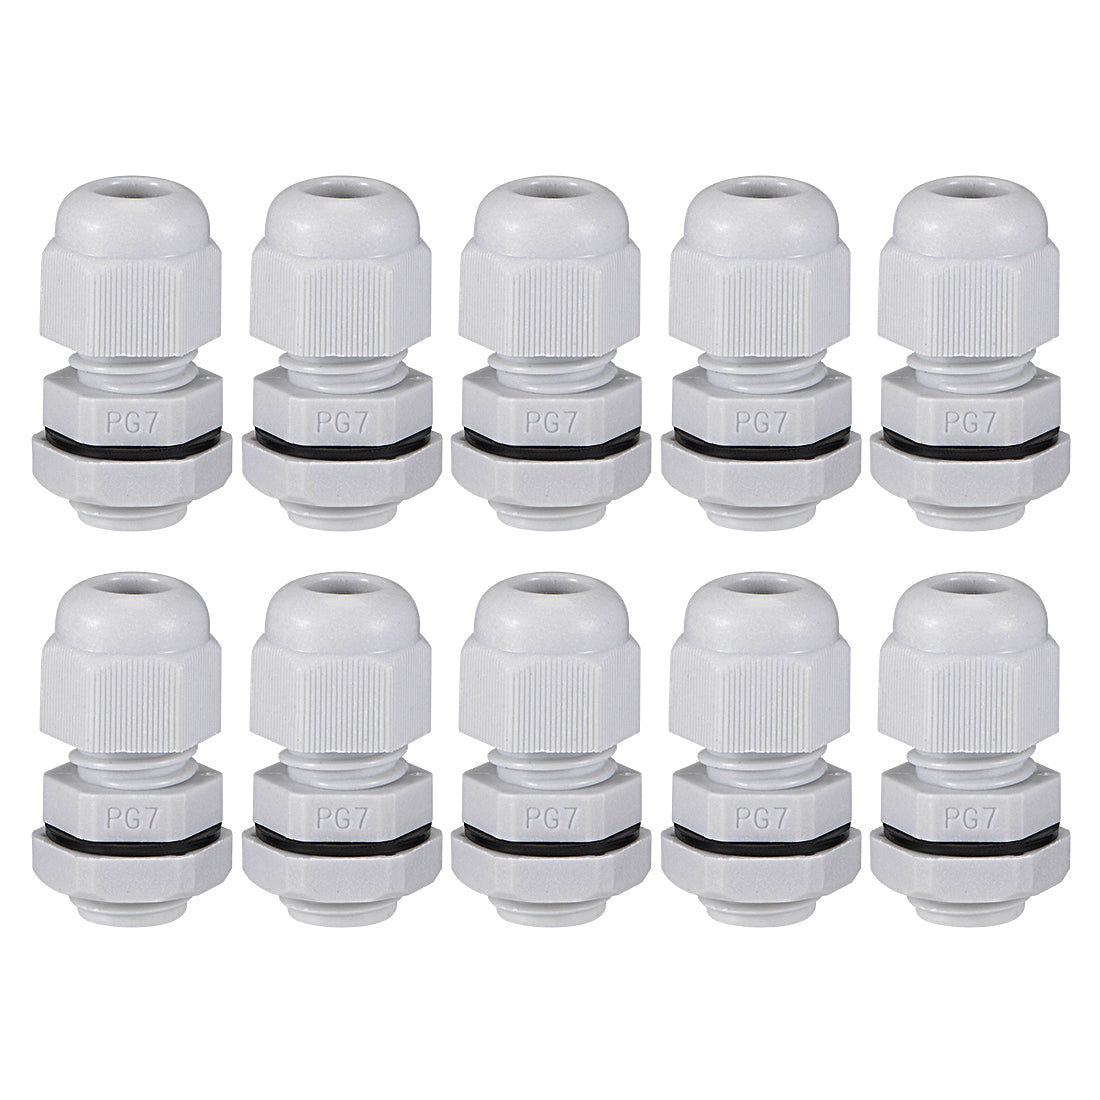 uxcell Uxcell PG7 Cable Gland 2mm-5mm Wire Hole Waterproof Nylon Joint Adjustable Locknut with Washer White 10pcs